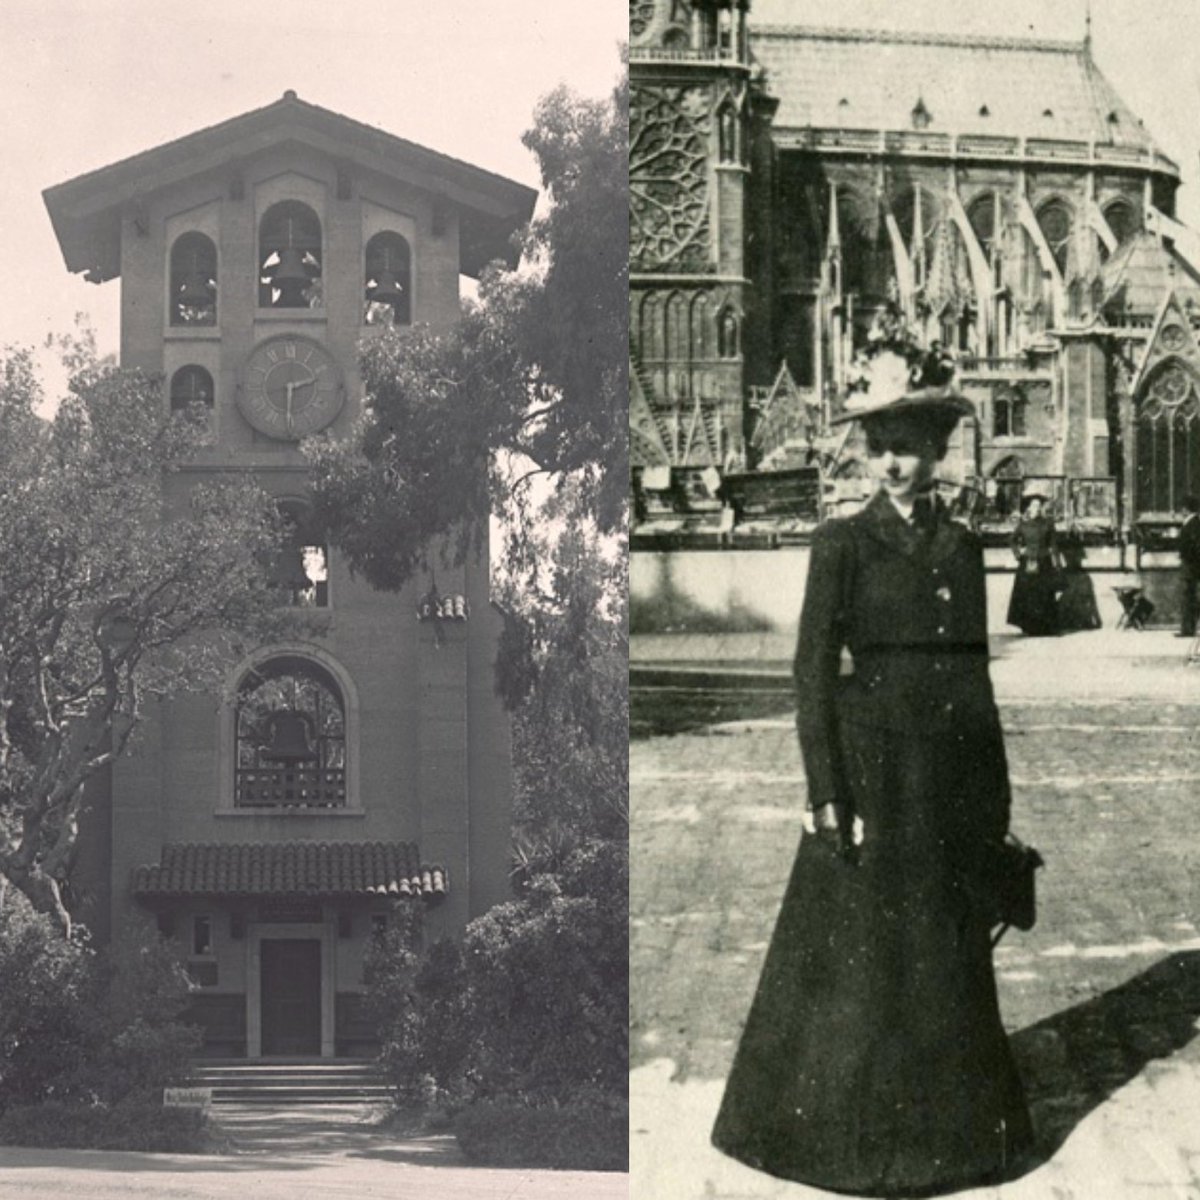 California architect and engineer #JuliaMorgan was a trailblazer. She designed more than 700 buildings, including #HearstCastle but this bell tower at #MIllsCollege put her on the map!  #InternationalDayOfWomenAndGirlsInScience #WomenInScience #UnitedNations #libaries #archives